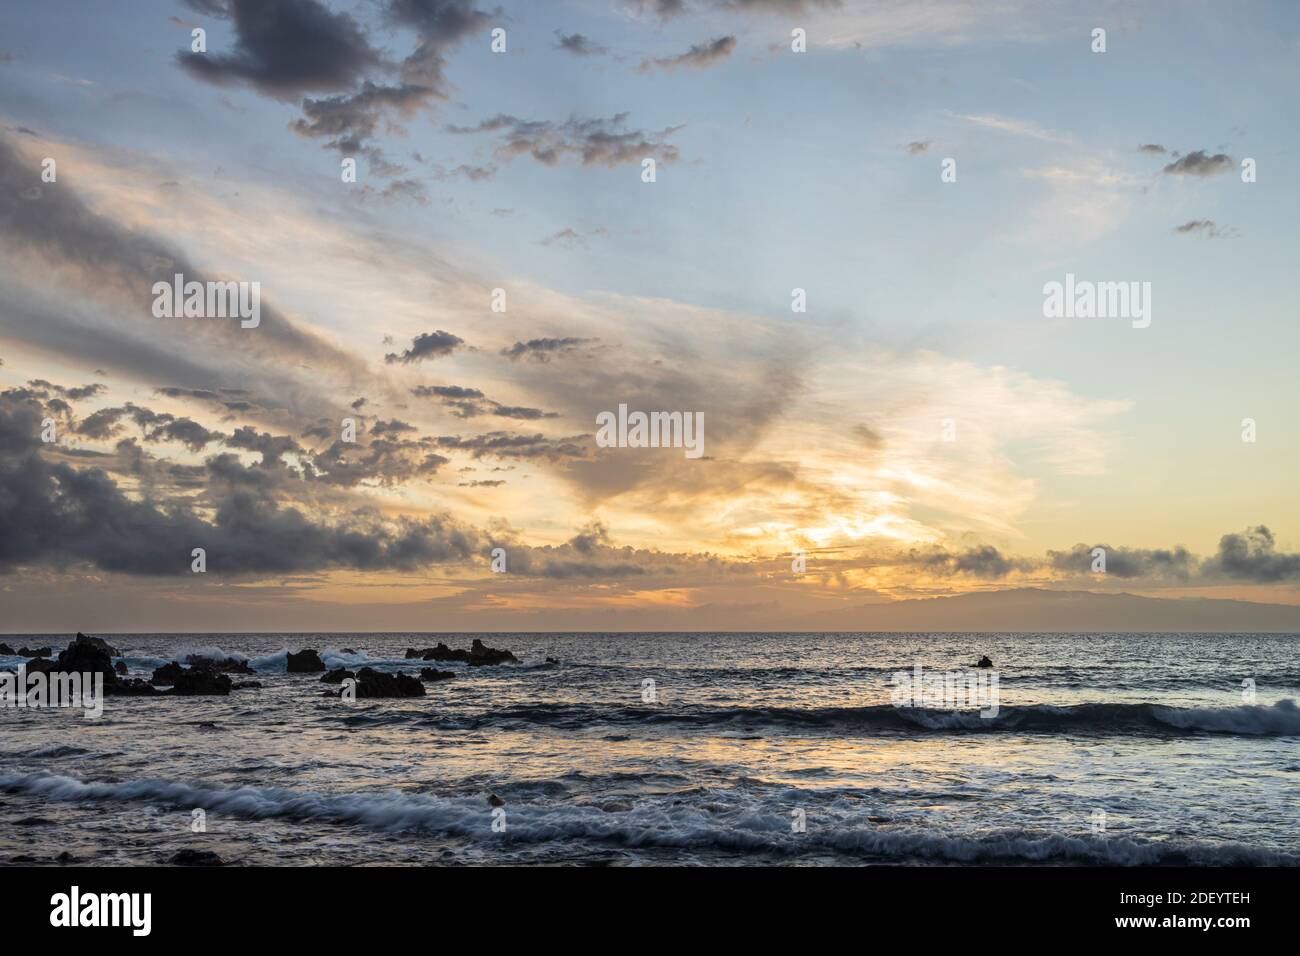 Mixed cirrus and cumulus clouds at different levels in the sky at sunset over the atlantic ocean, Playa San Juan, Tenerife, Canary Islands, Spain, Stock Photo